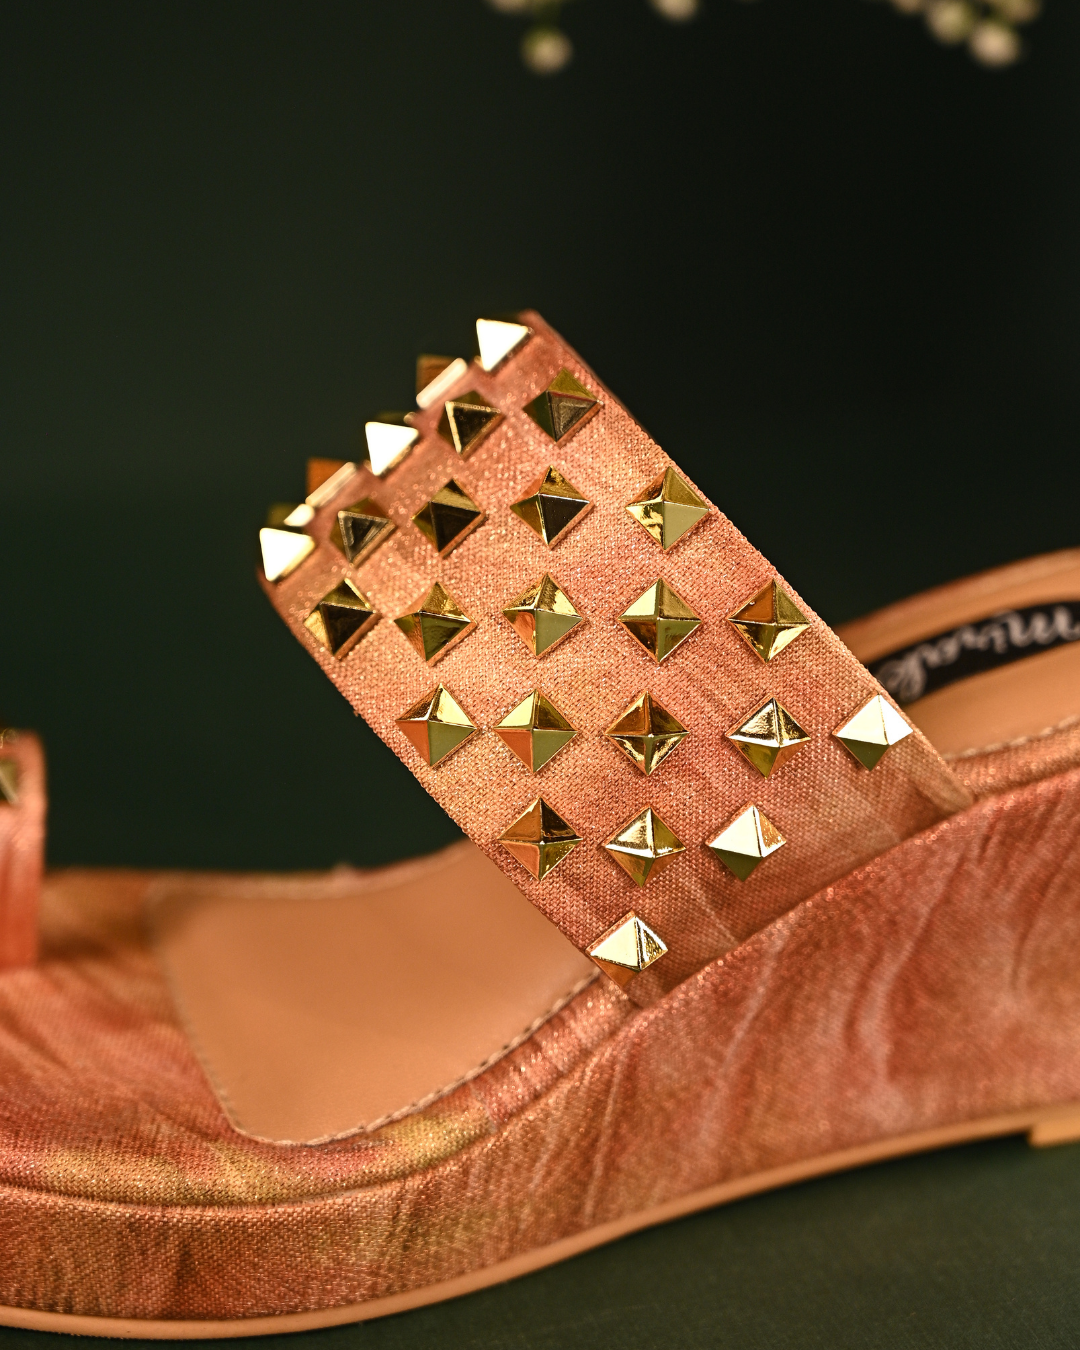 Wedges With Gold Studs